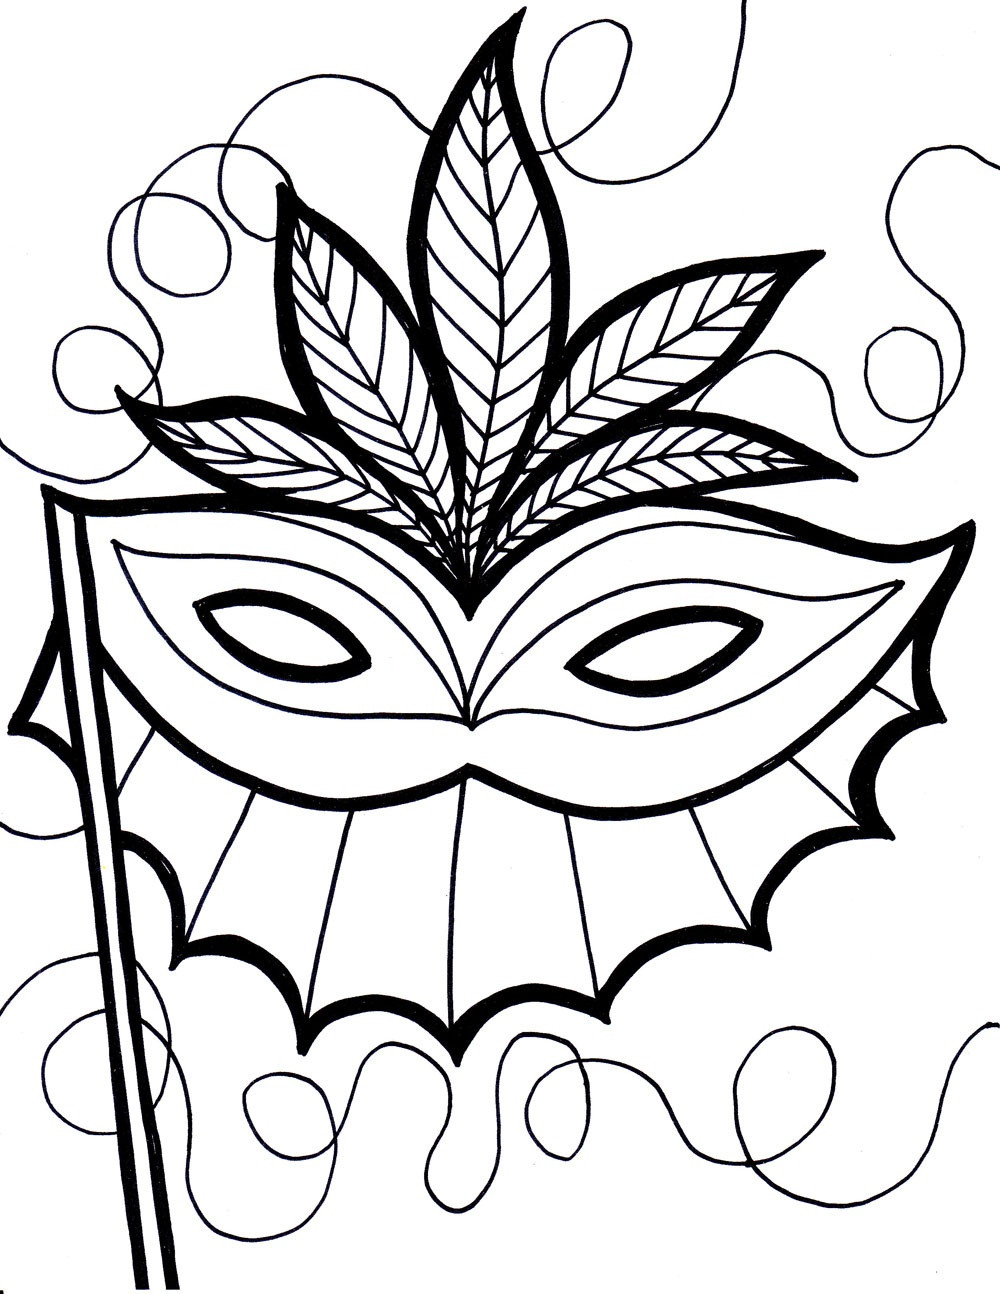 Mardi Gras Coloring Pages Free Printable
 Free Printable Mardi Gras Coloring Pages For Kids